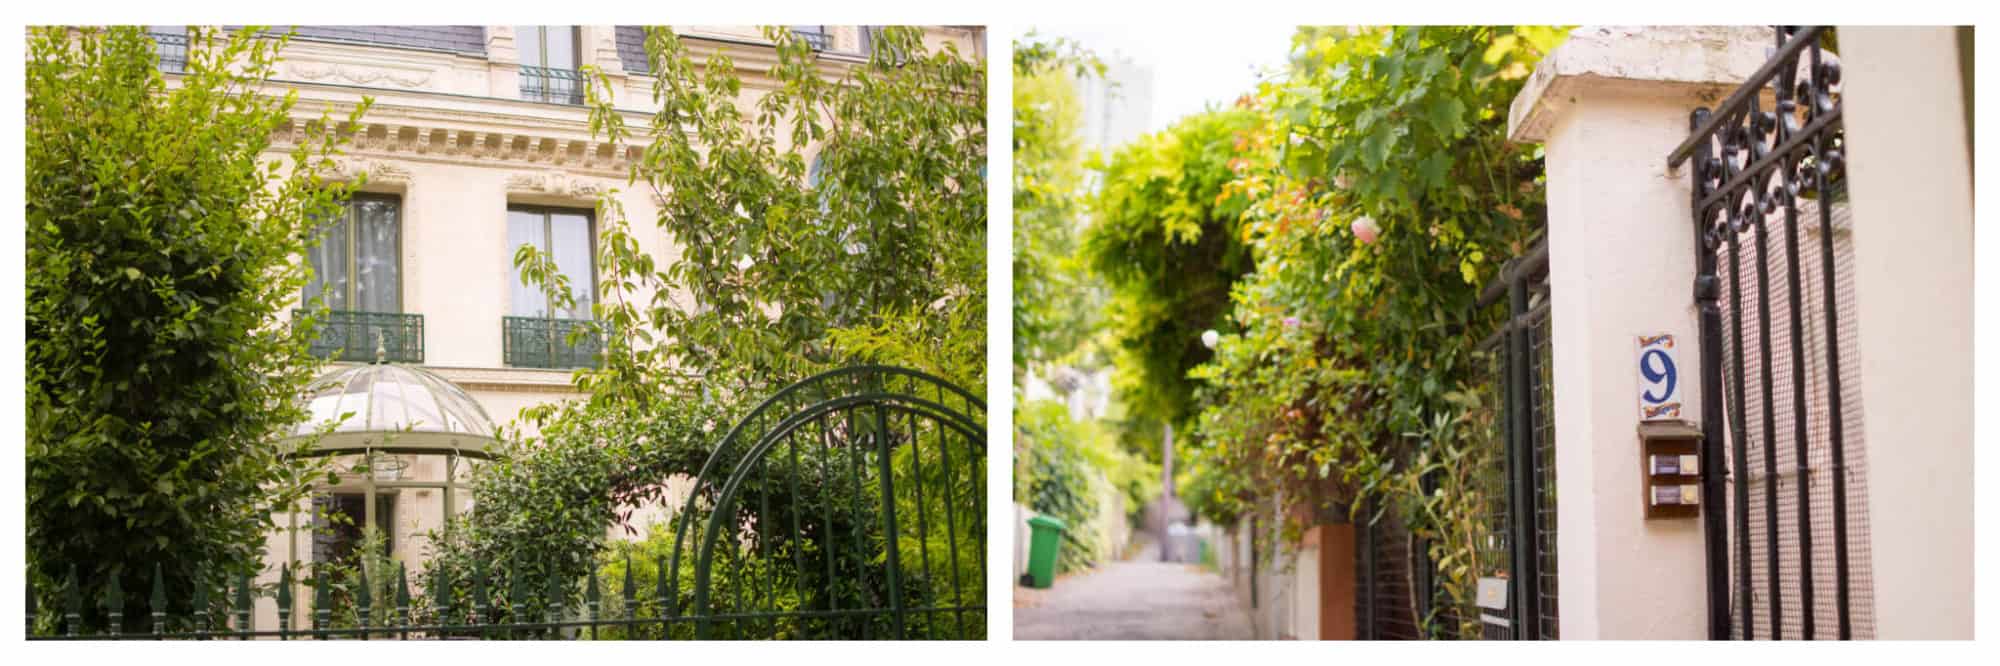 On left: The Cité des Fleurs in the 17th arrondissement of Paris features gated homes with unique architectural and botanical styles. On right: Tiny pink flowers begin to bud in the Quartier de la Mouzaïa in the 19th arrondissement of Paris. 